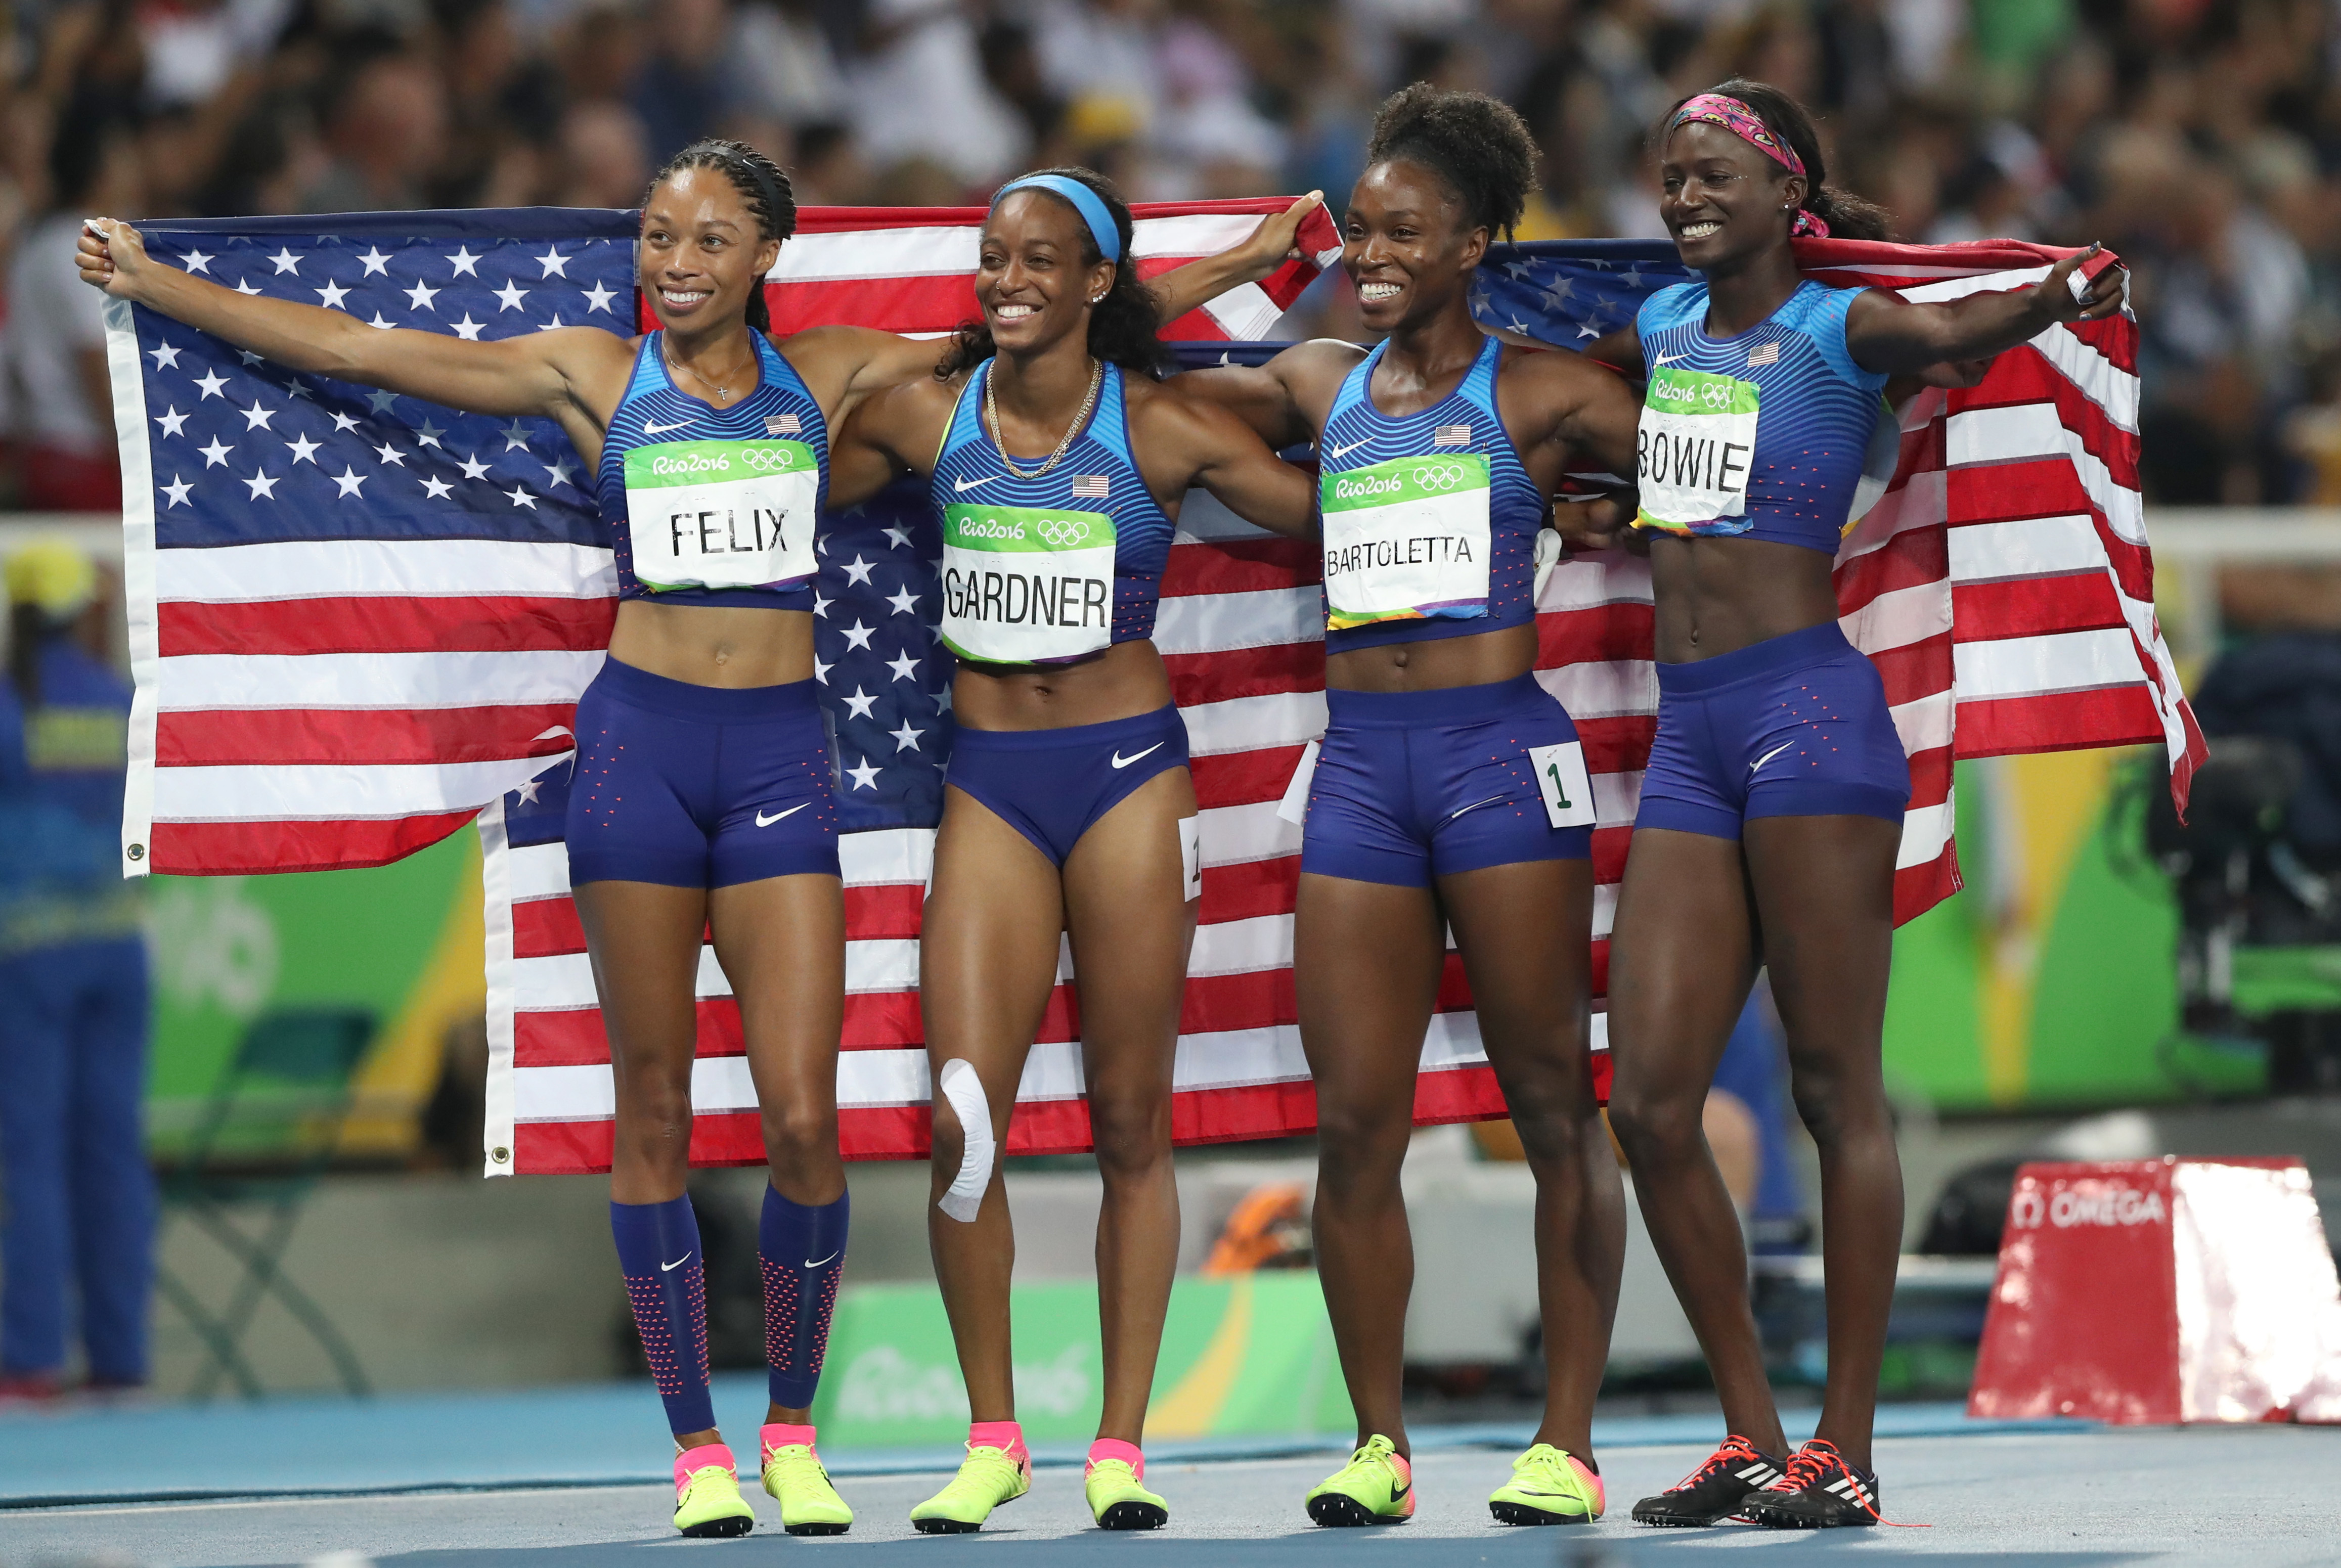 The United States team from left, Allyson Felix, English Gardner, Tianna Bartoletta and Tori Bowie celebrate winning the gold medal in the women's 4x100-meter relay final during the athletics competitions of the 2016 Summer Olympics at the Olympic stadium in Rio de Janeiro, Brazil, Friday, Aug. 19, 2016. (AP Photo/Lee Jin-man)